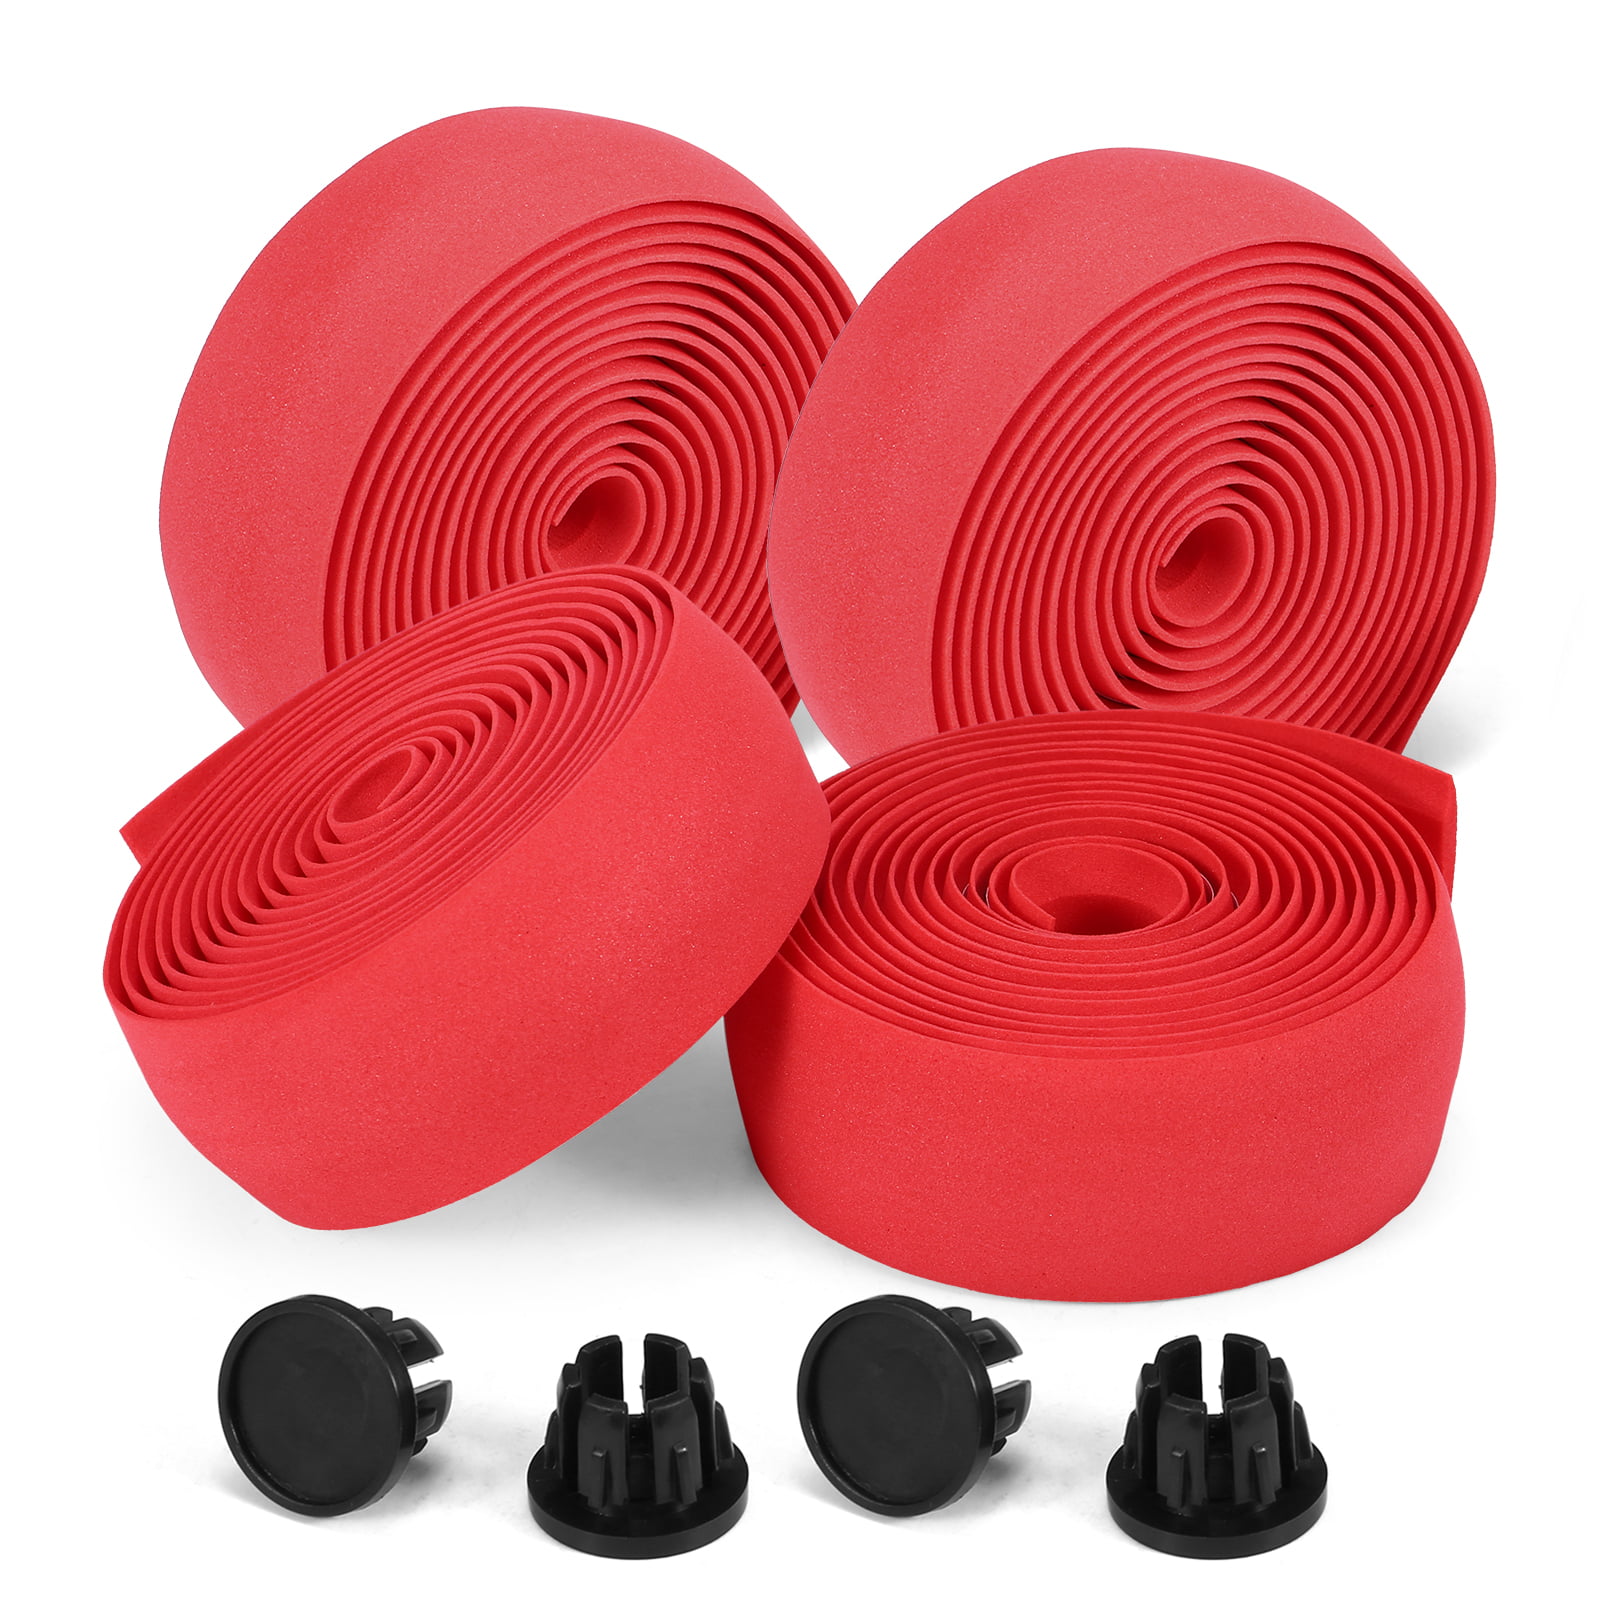 Bike Grip Tape for Road Bicycle Colorful EVA Foam PU Leather Self Adhesive Handlebars Tapes with Bar End Plugs for Cycling Handles Wraps Changing 2PCS Per Set Red 3mm 